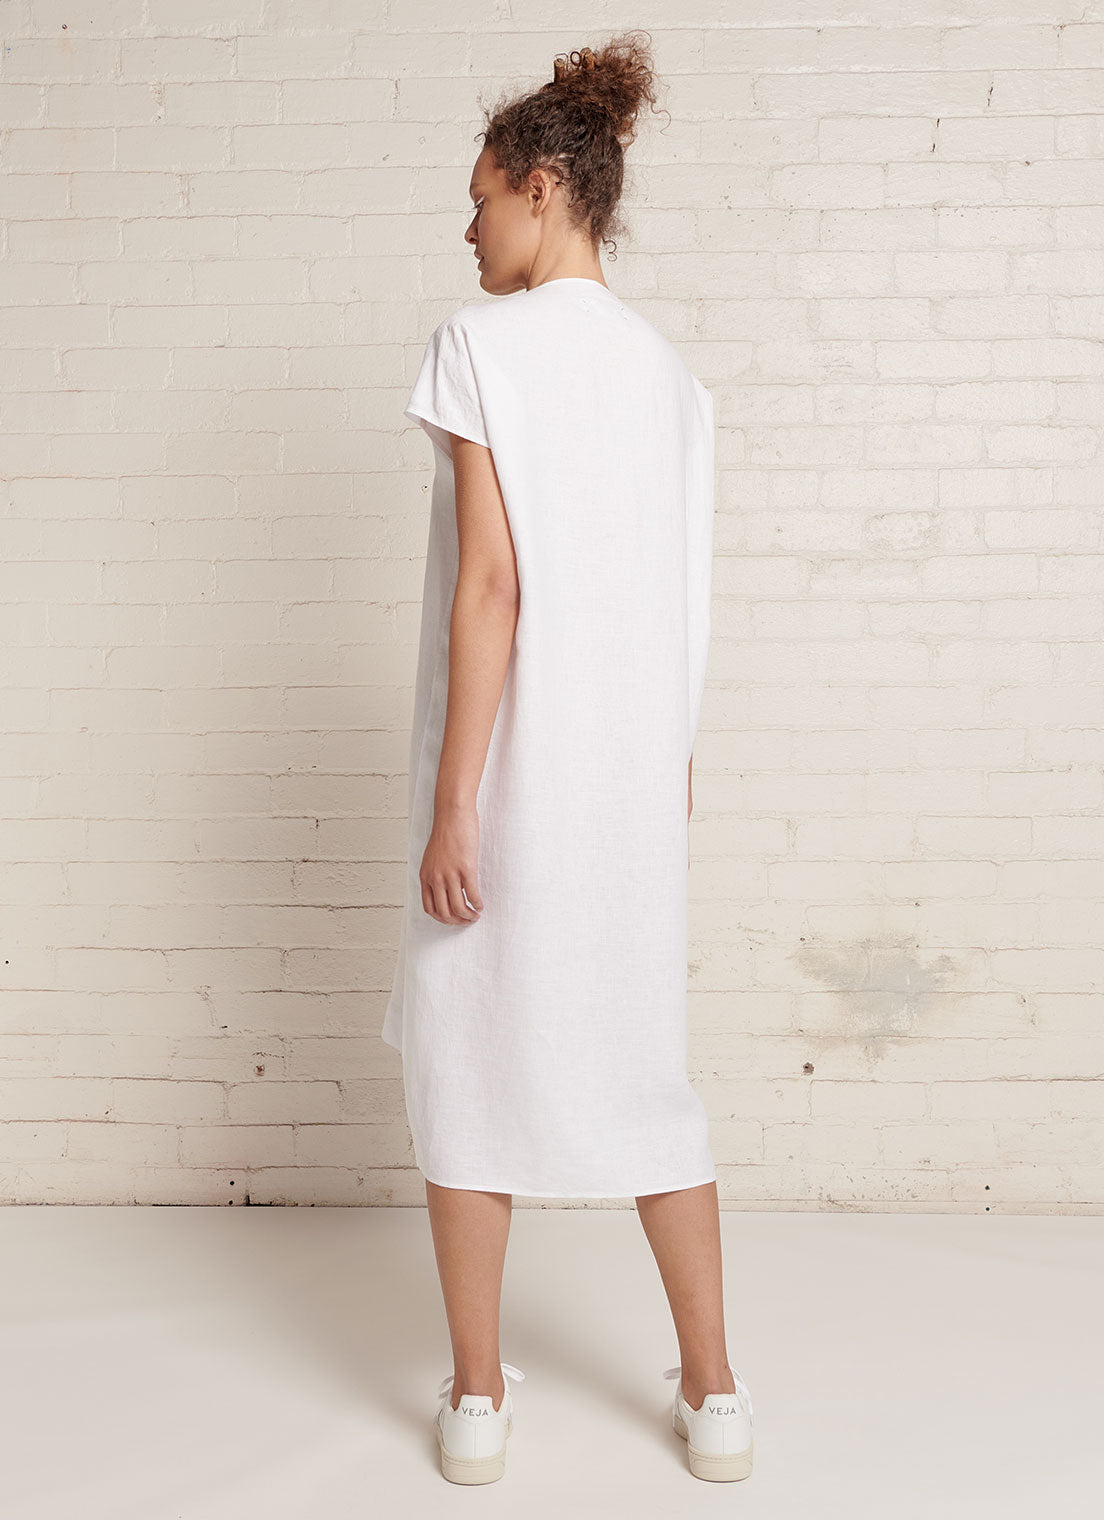 A white, knee-length linen dress with short sleeves, open neckline and centre front pleat detail made from yarn dye washed linen